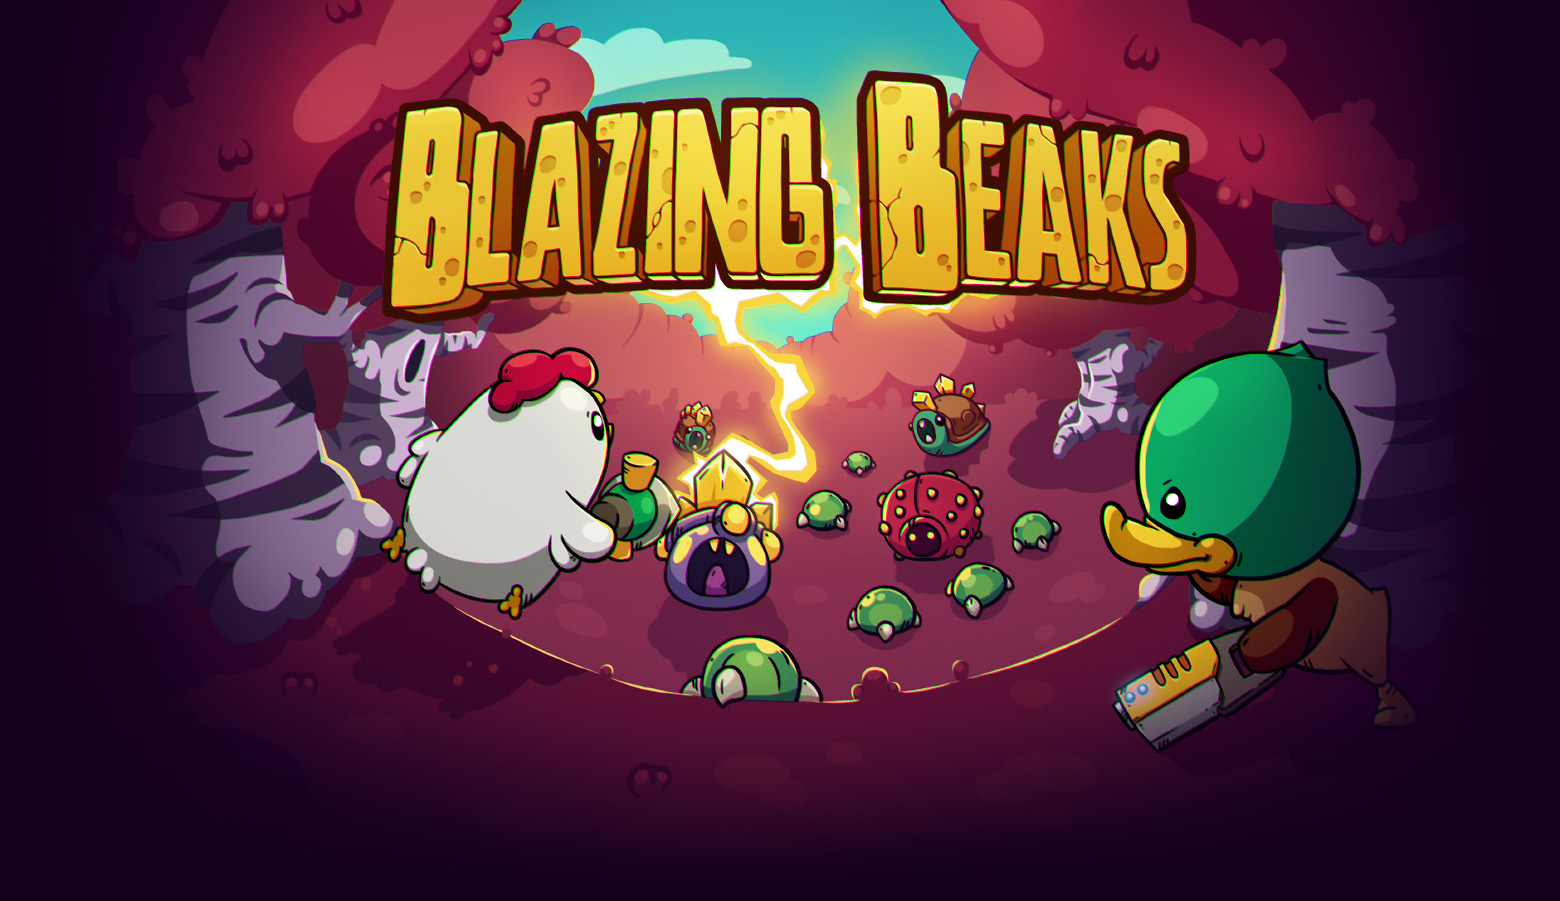 Blazing Beaks download the last version for ipod